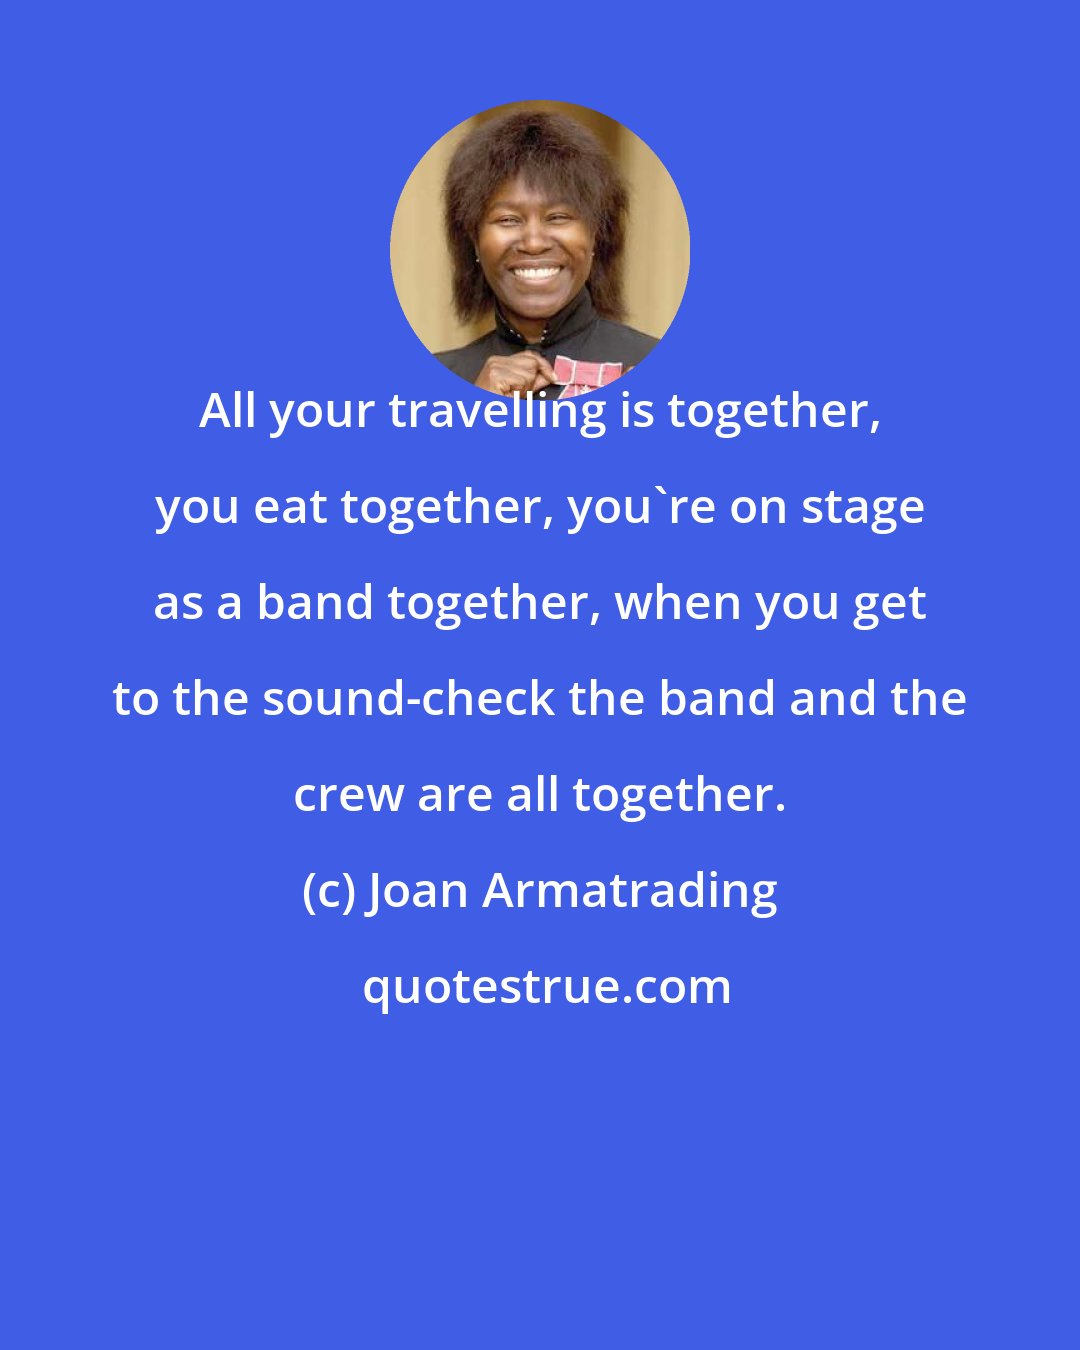 Joan Armatrading: All your travelling is together, you eat together, you're on stage as a band together, when you get to the sound-check the band and the crew are all together.